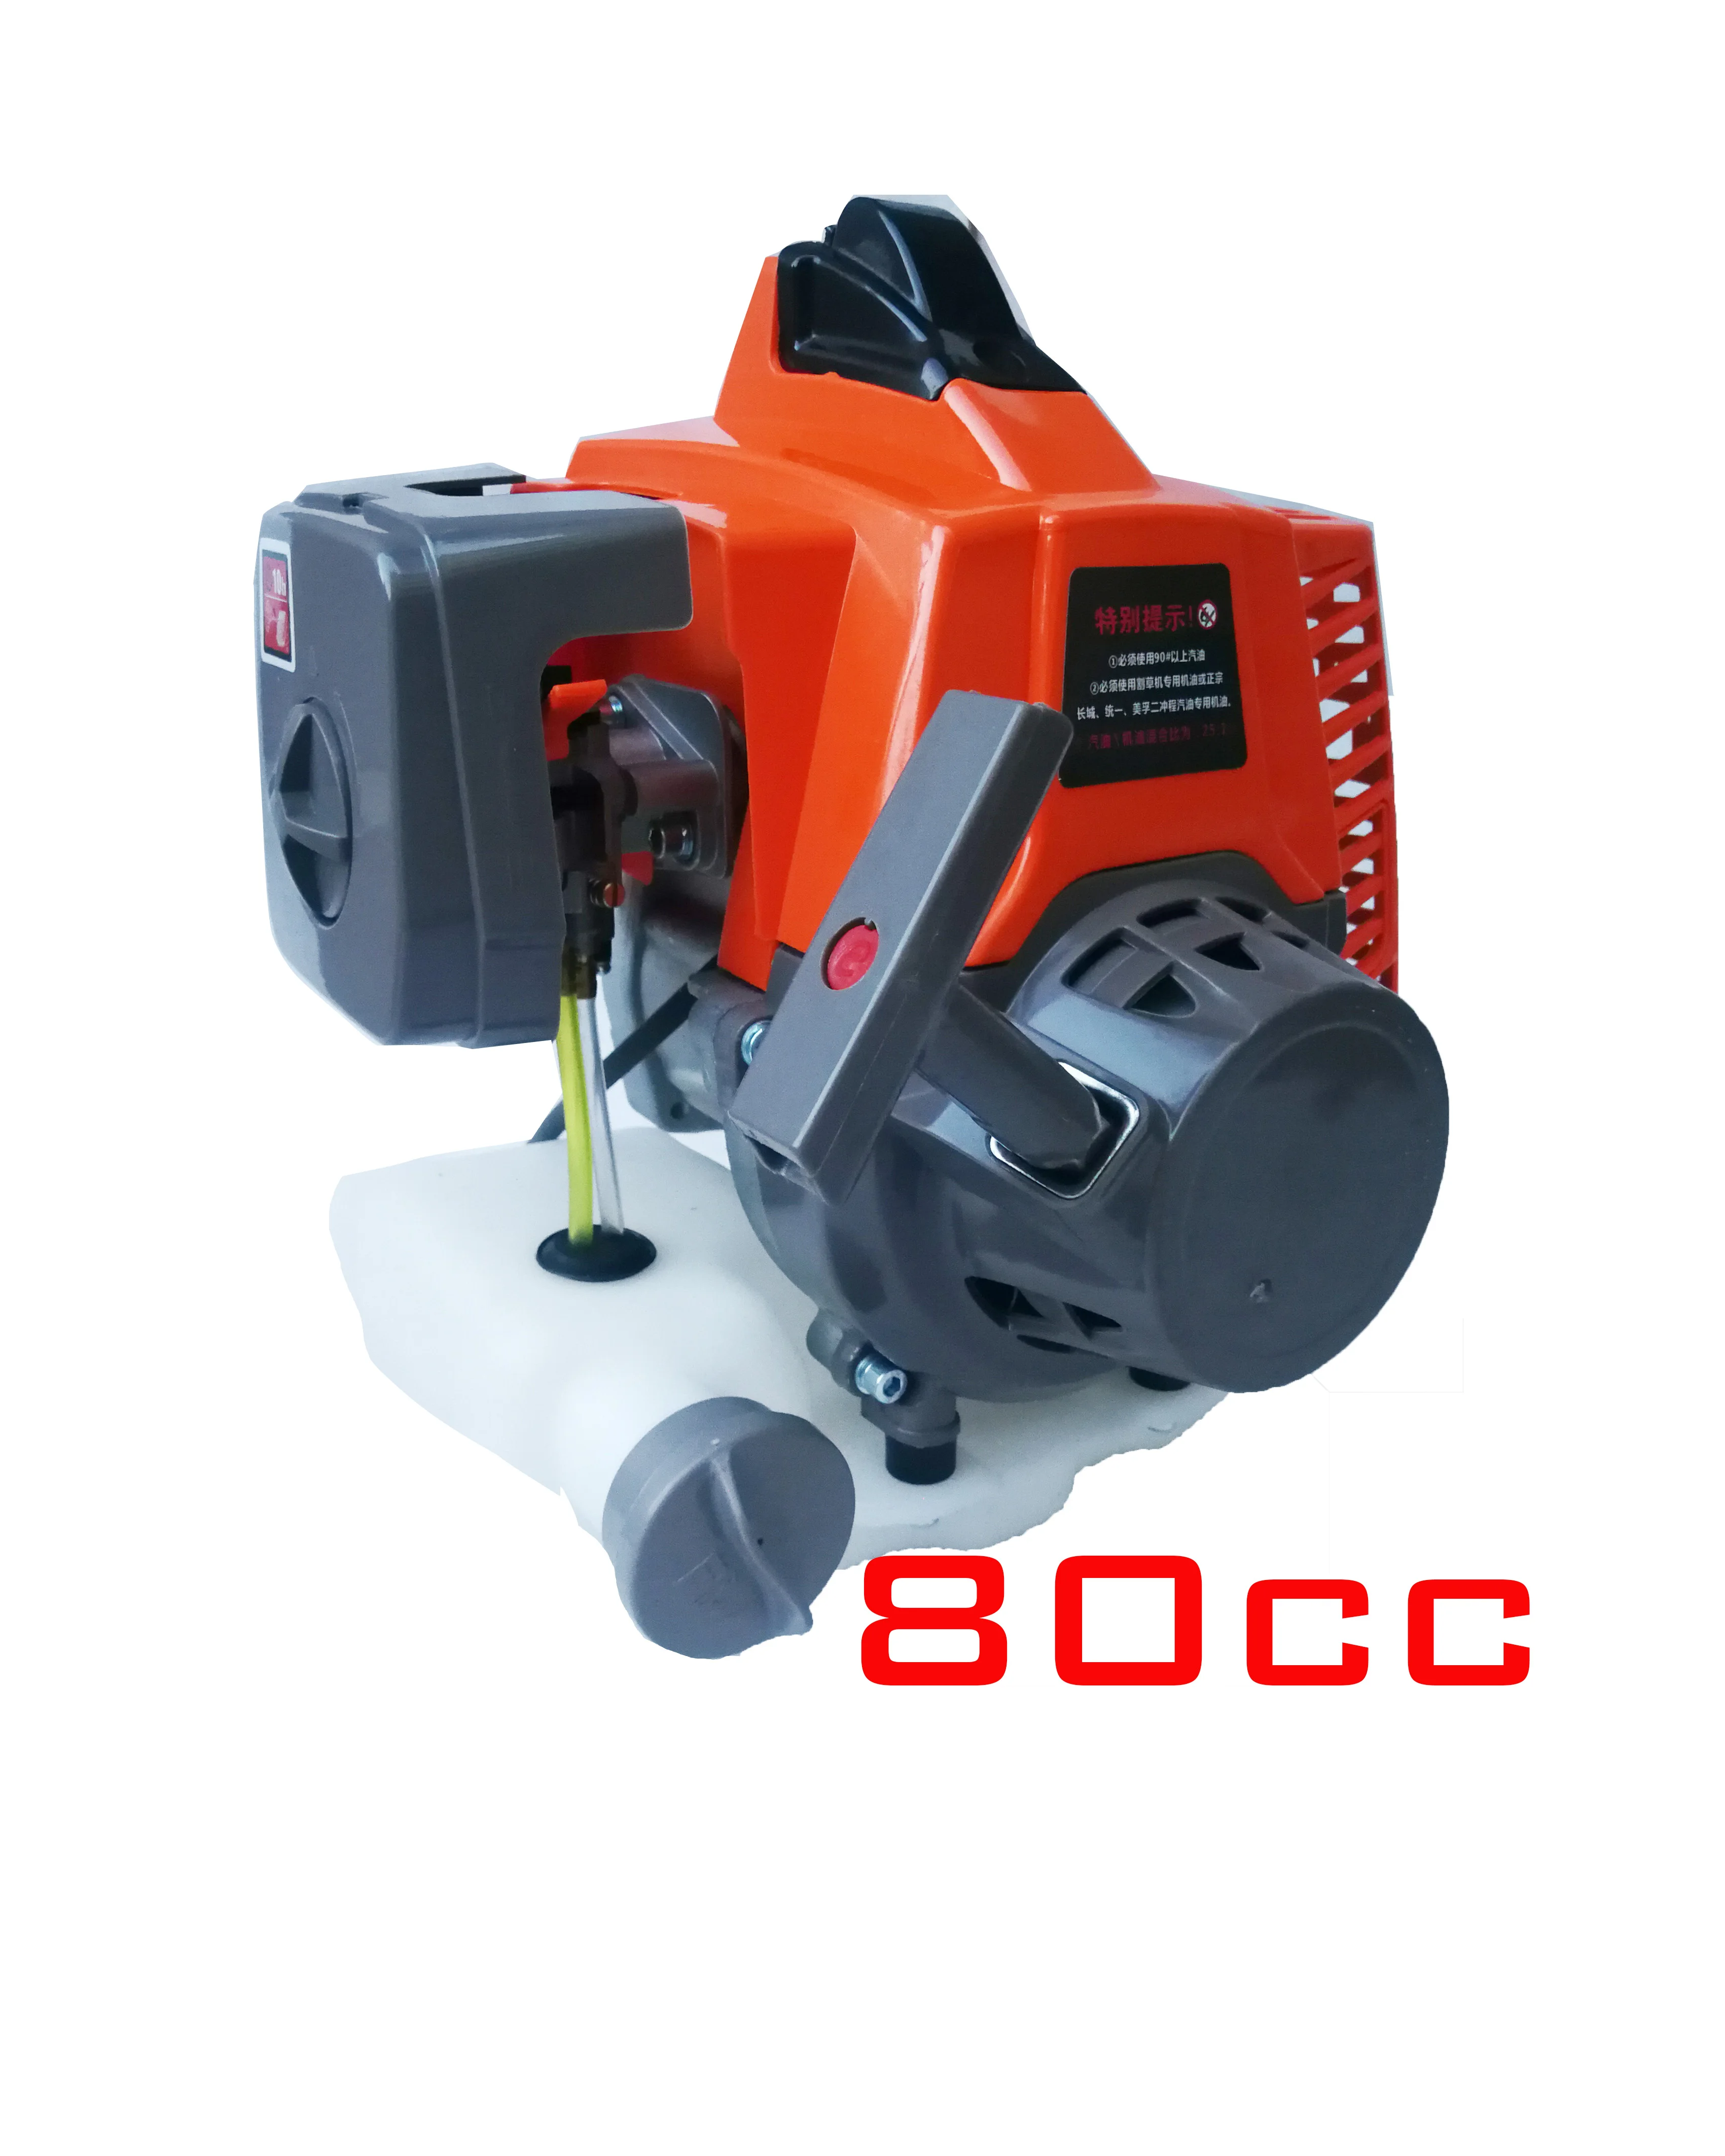 Really 80cc 1E53F 2T Gasoline Engine 2 Stroke For Earth Drill Brush Cutter Goped Scooter Outboard Motor Not 63cc Olive Shaker enlarge